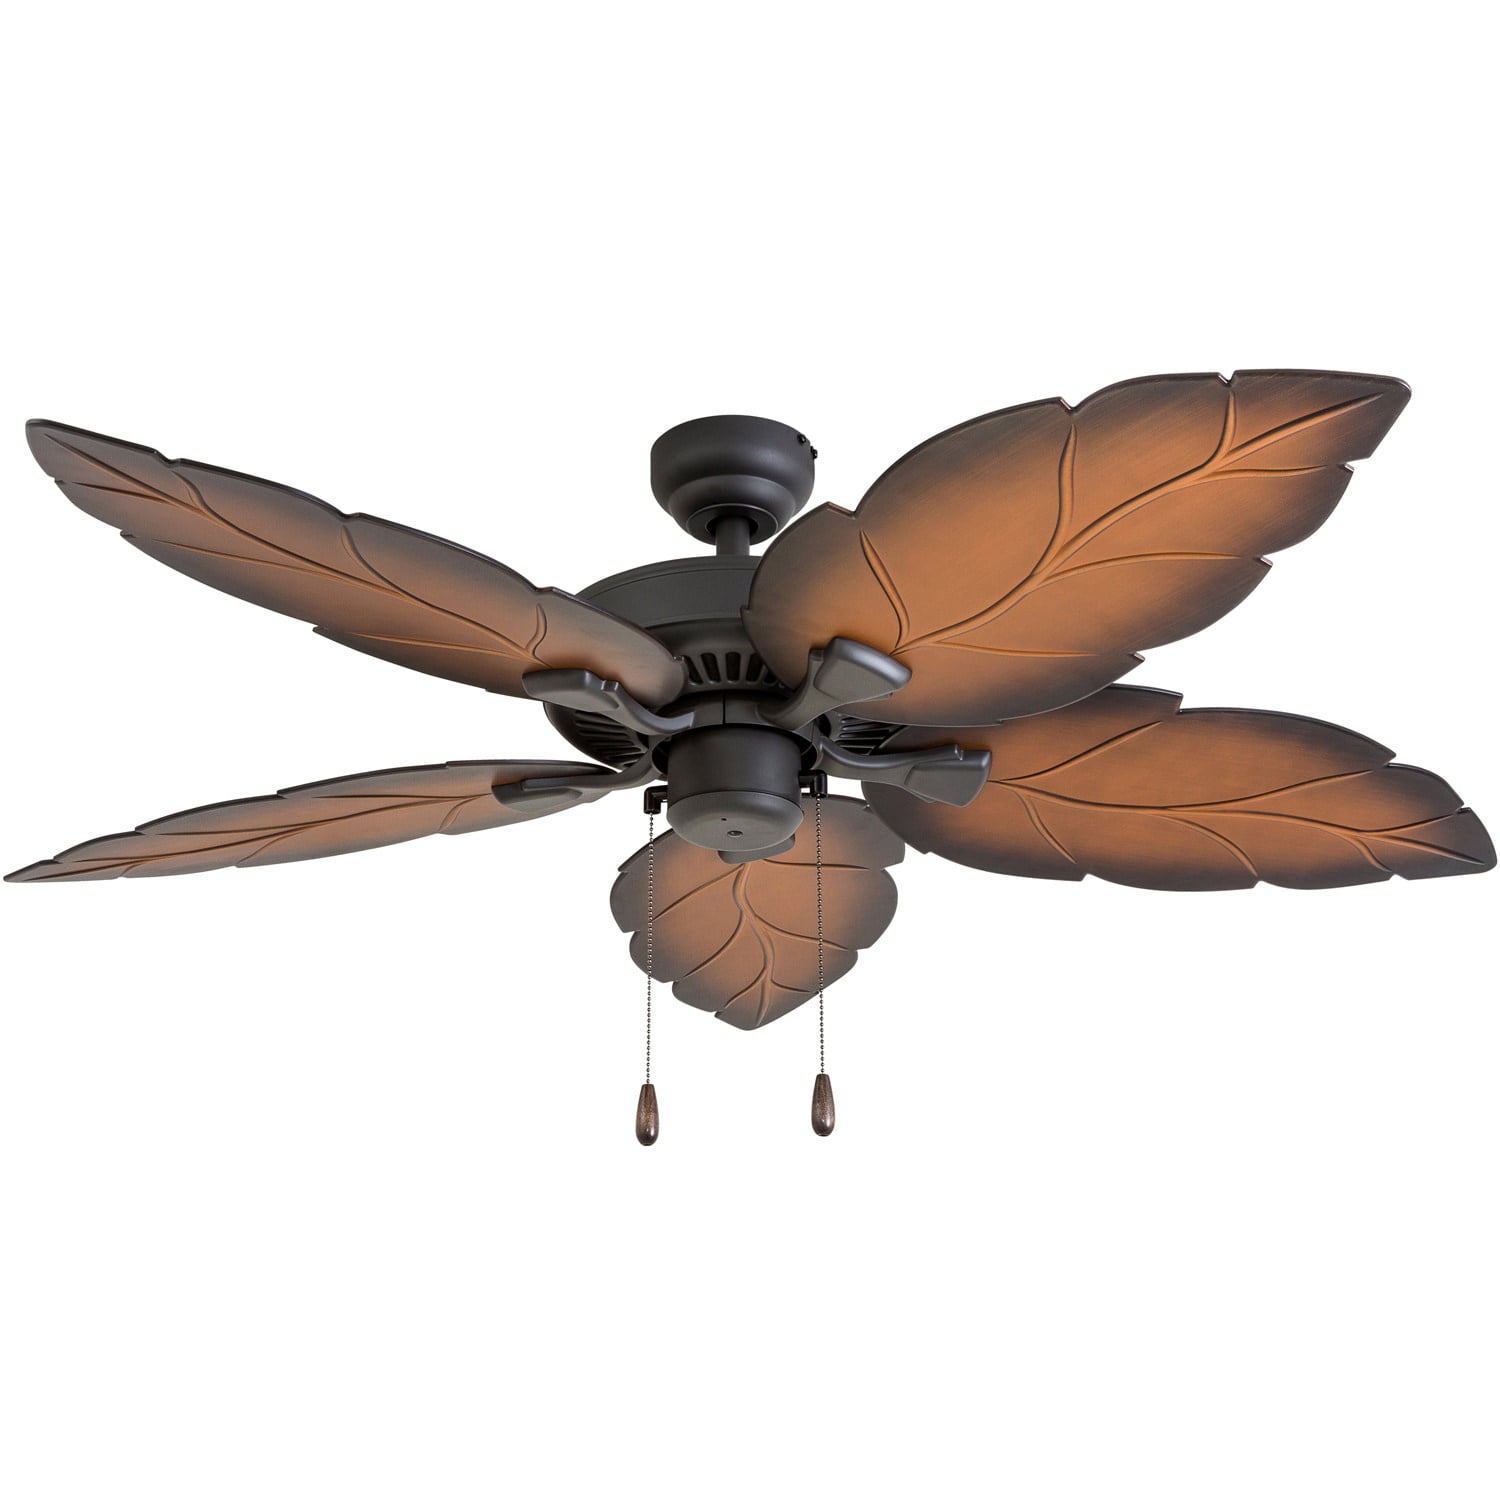 Prominence Home 50575-35 Falklands Tropical 52-Inch Tropical Bronze Damp  Rated Ceiling Fan, Mocha Blades